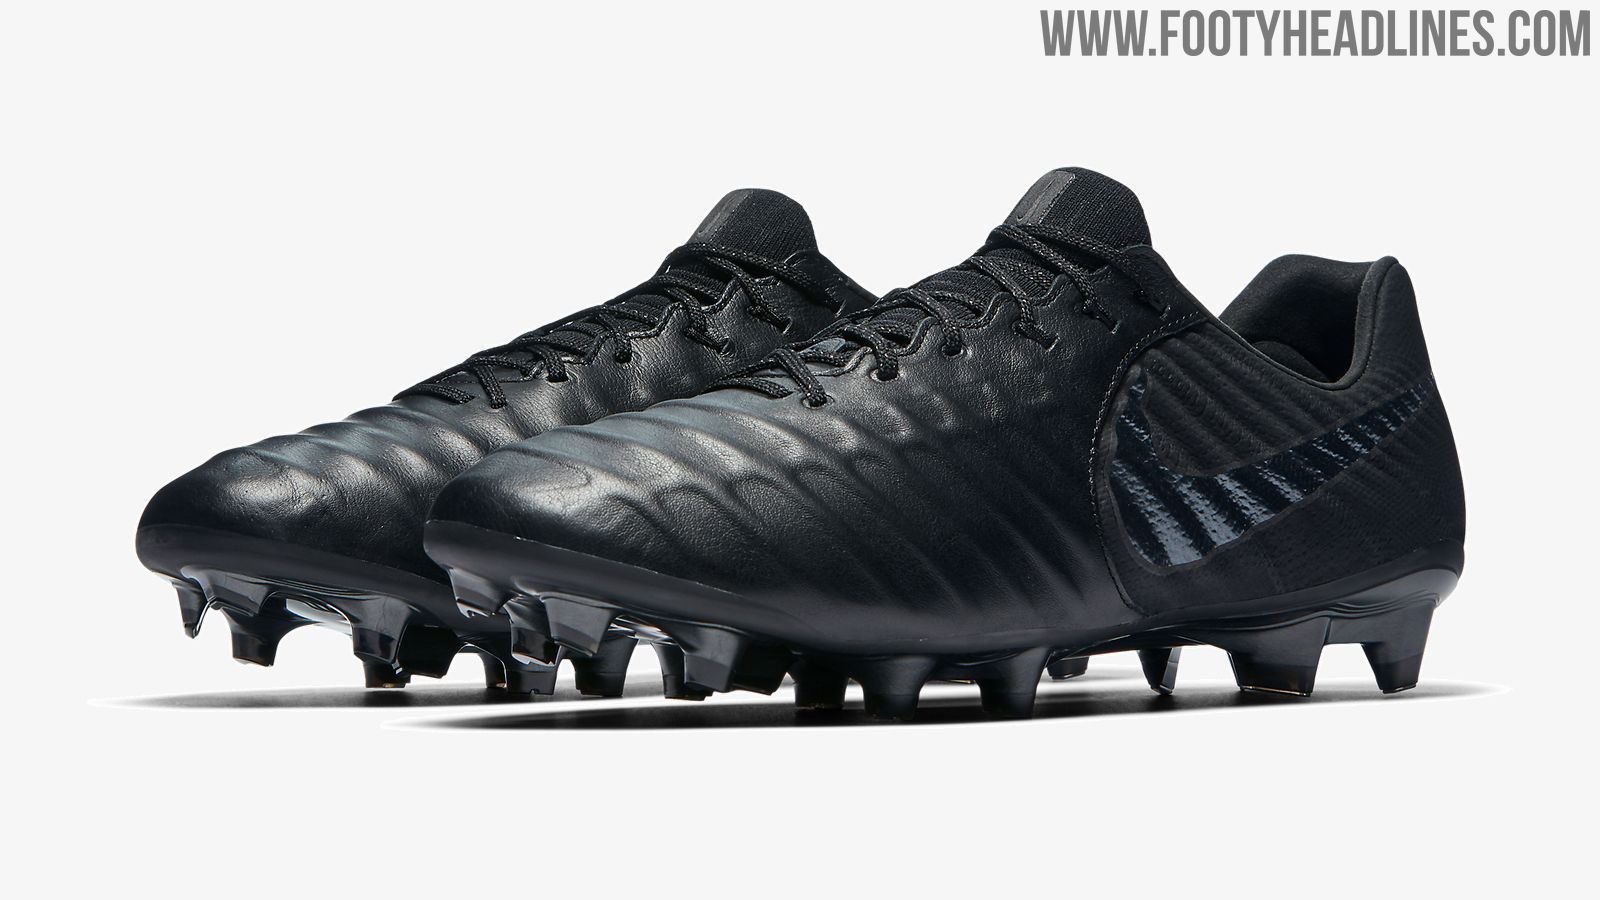 Blackout Nike Tiempo VII Ops Boots Released - Footy